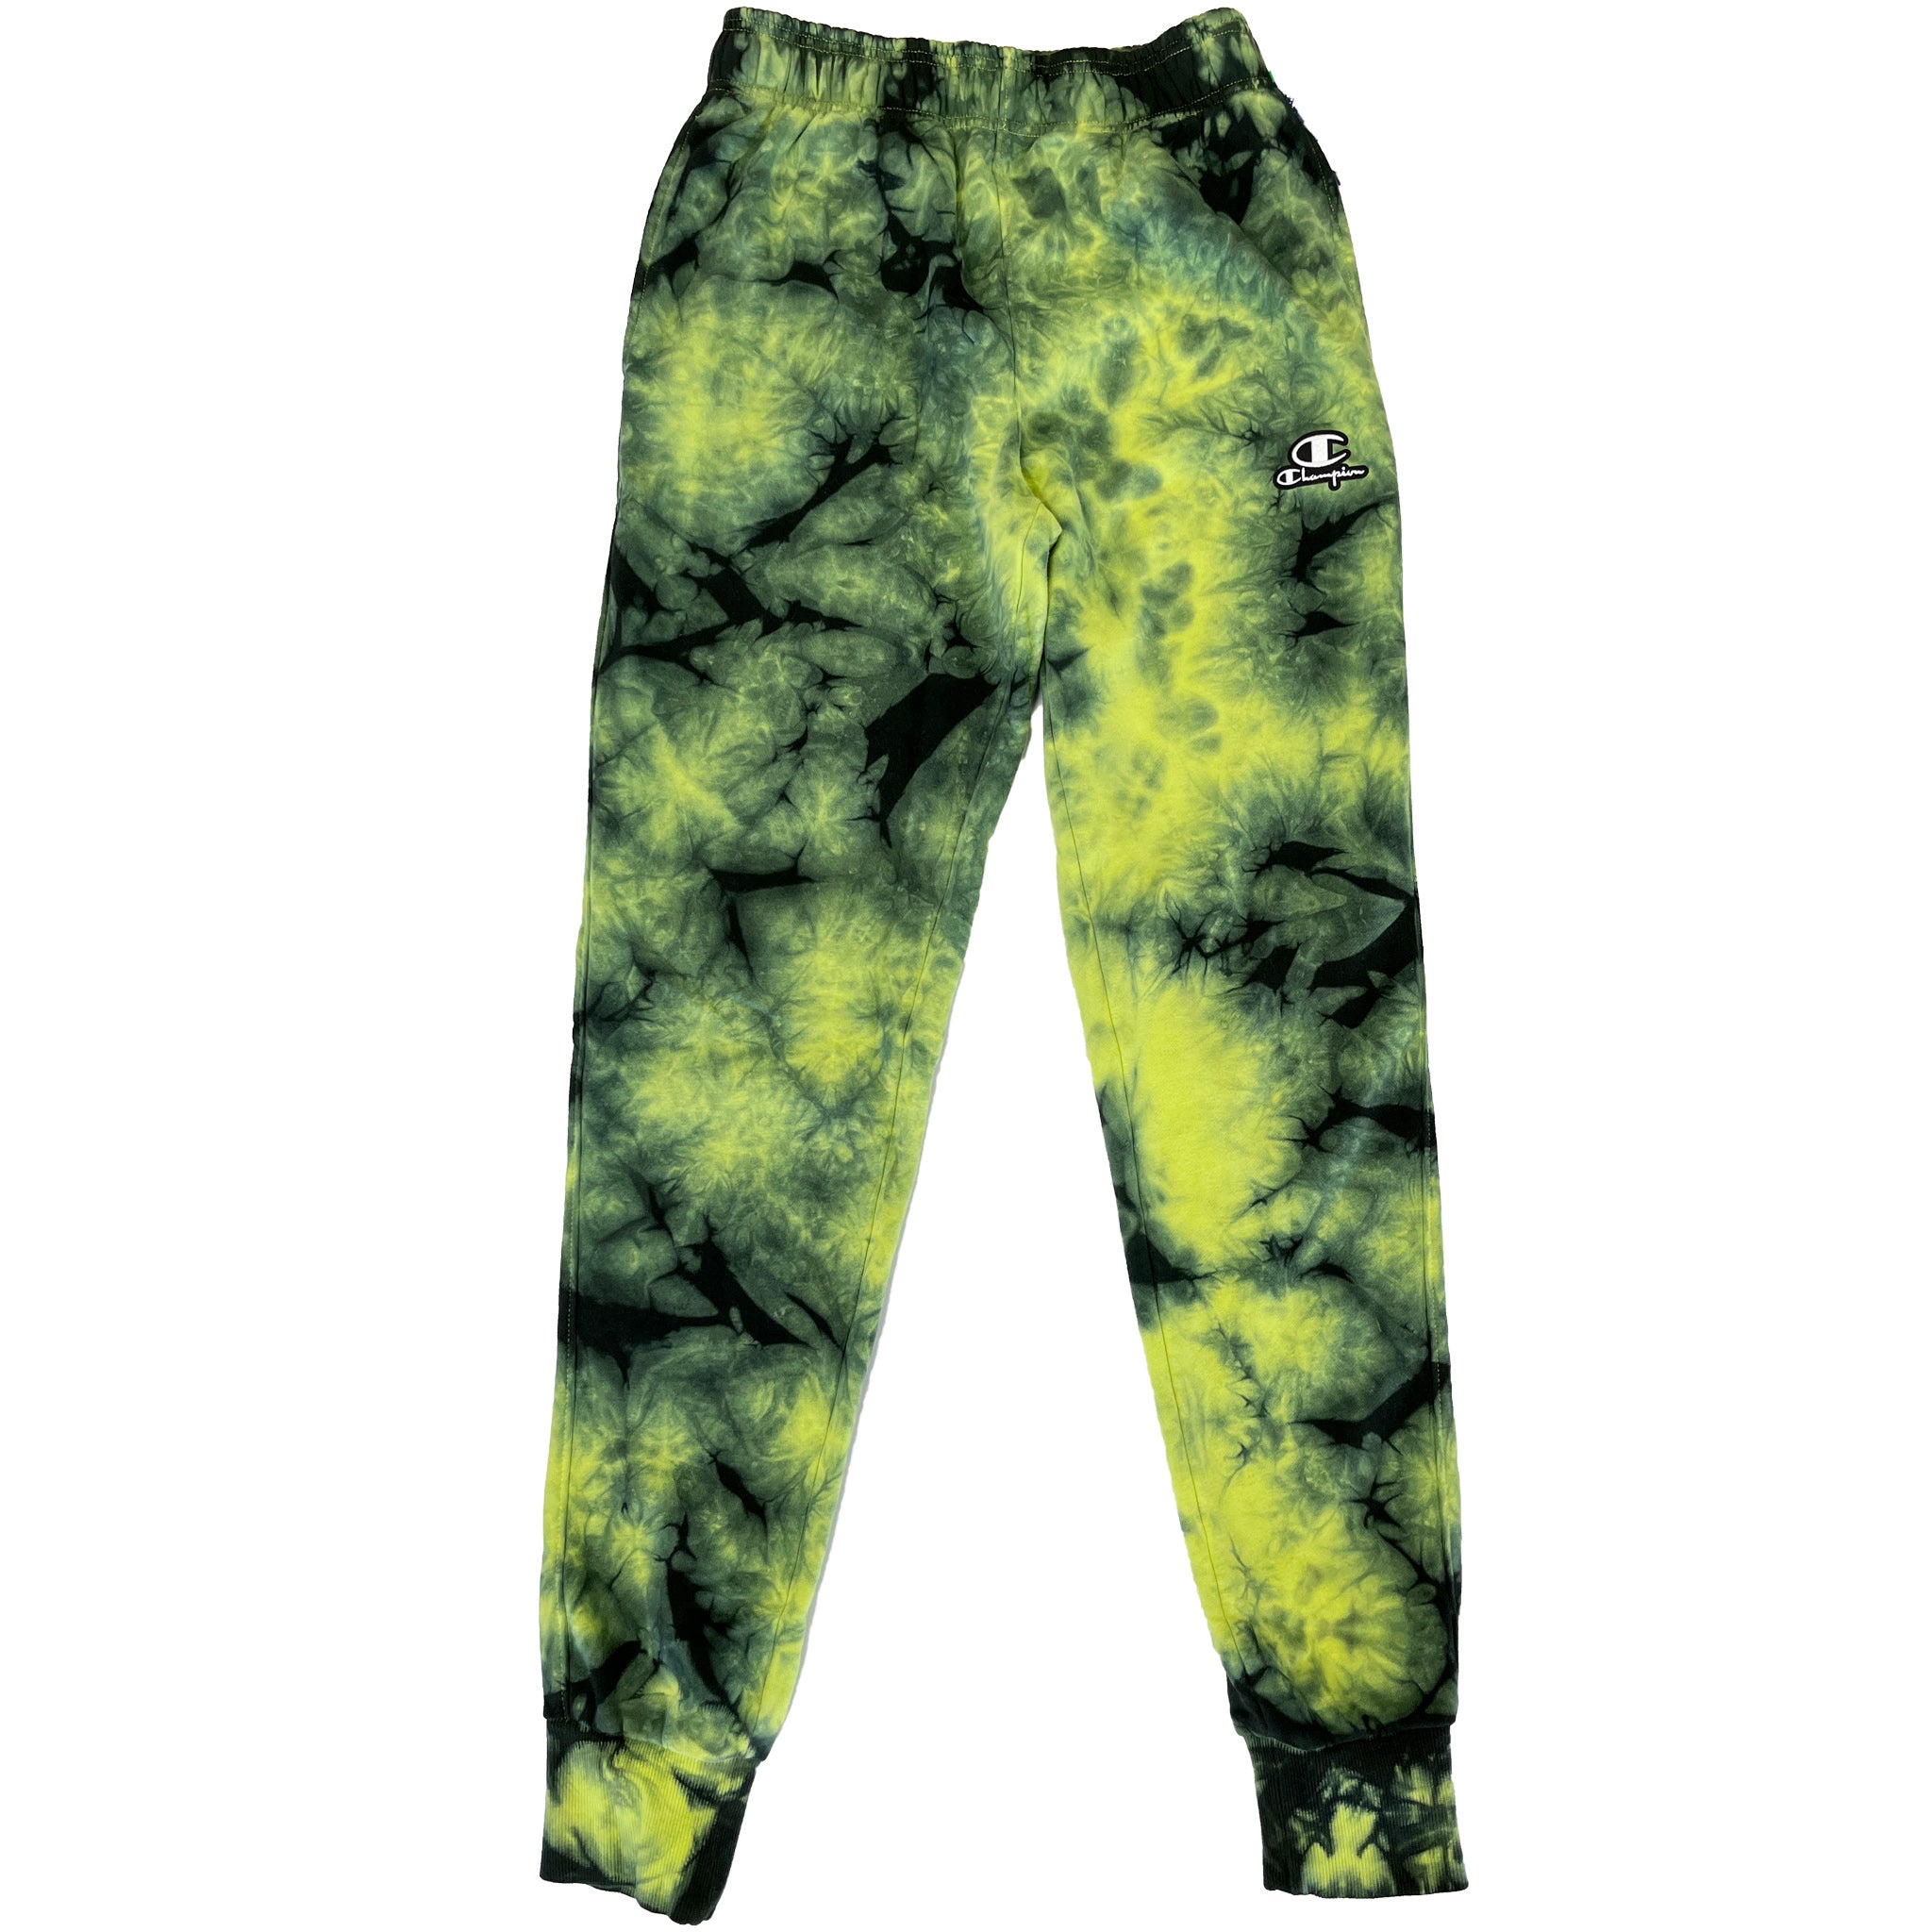 Champion Men's Galaxy Dye Jogger 31 Inches – That Shoe Store and More